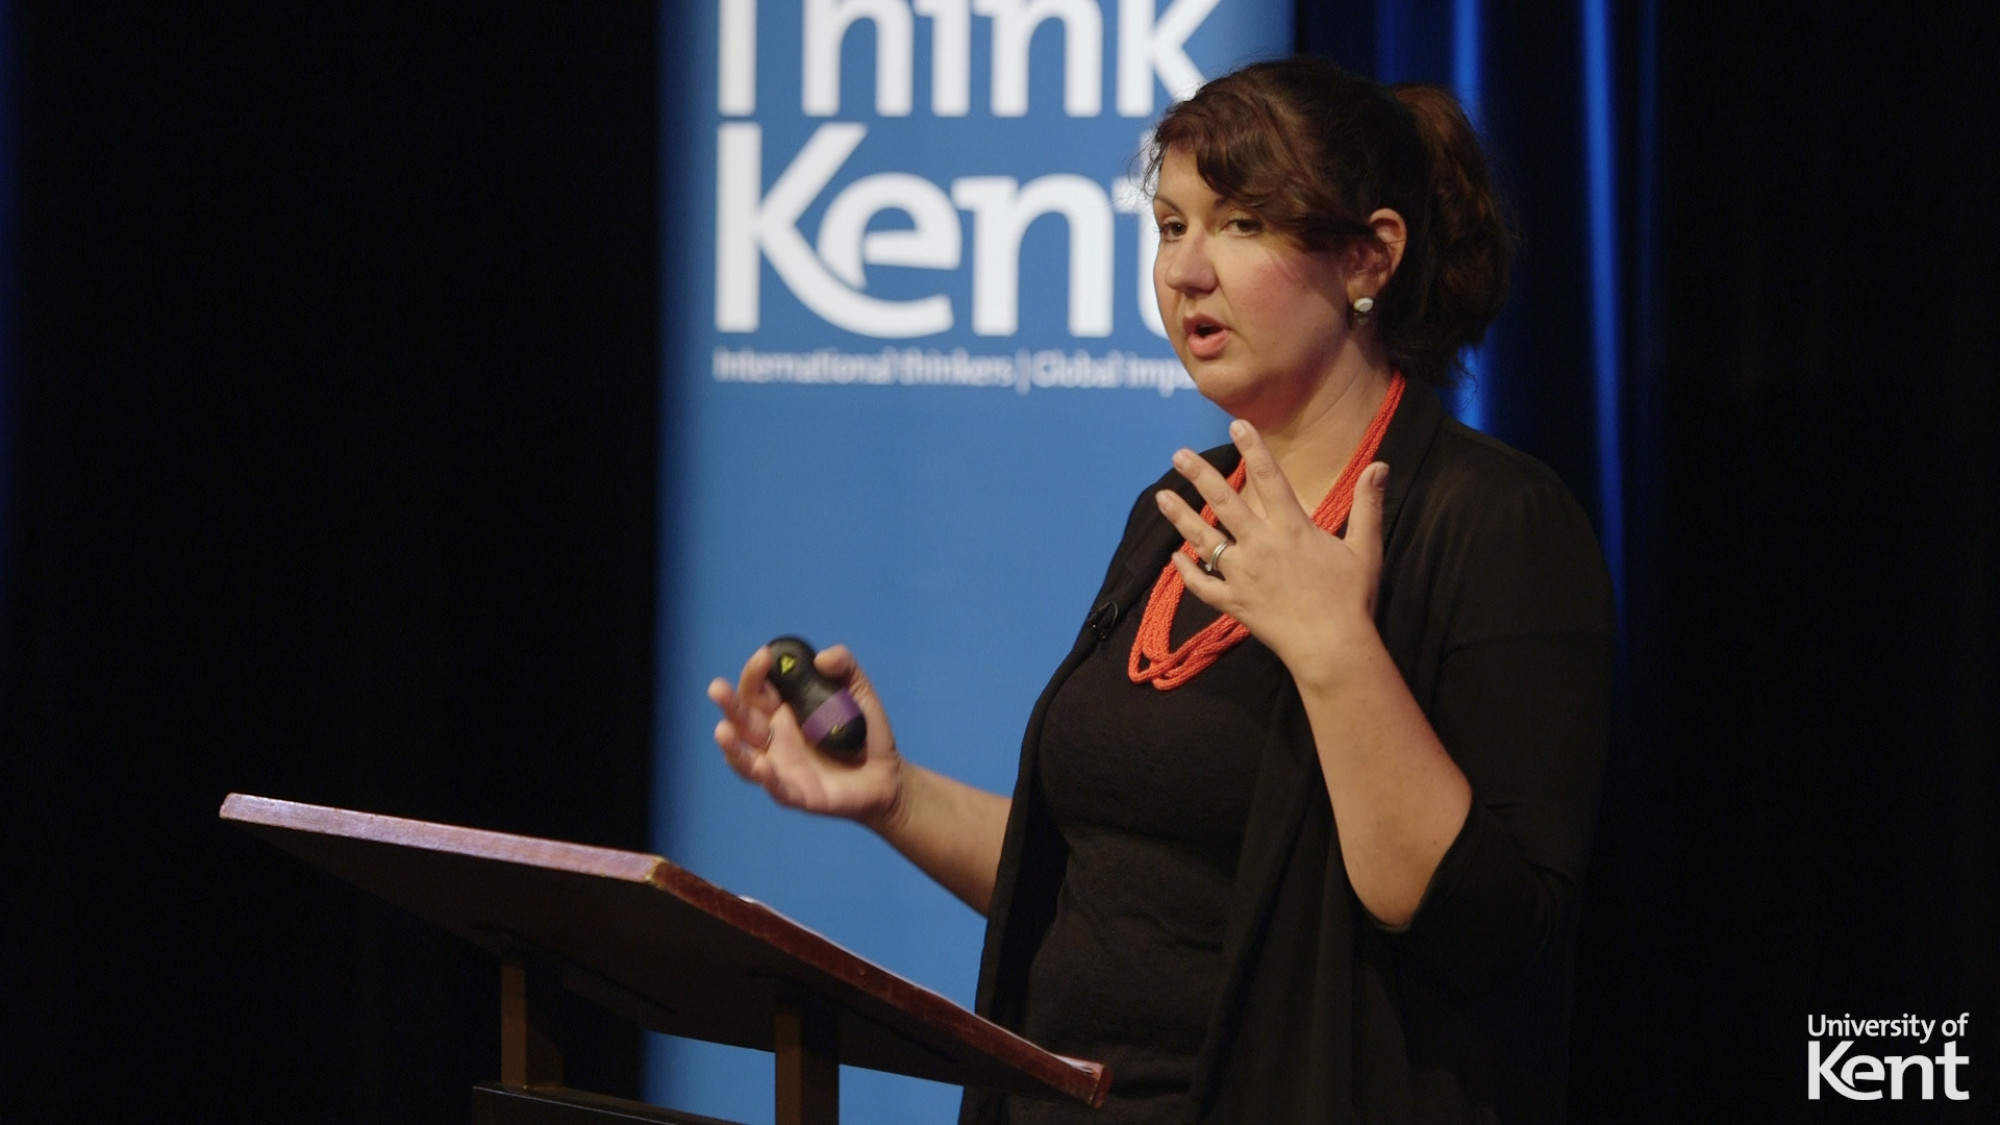 Lois Lee giving Think Kent lecture